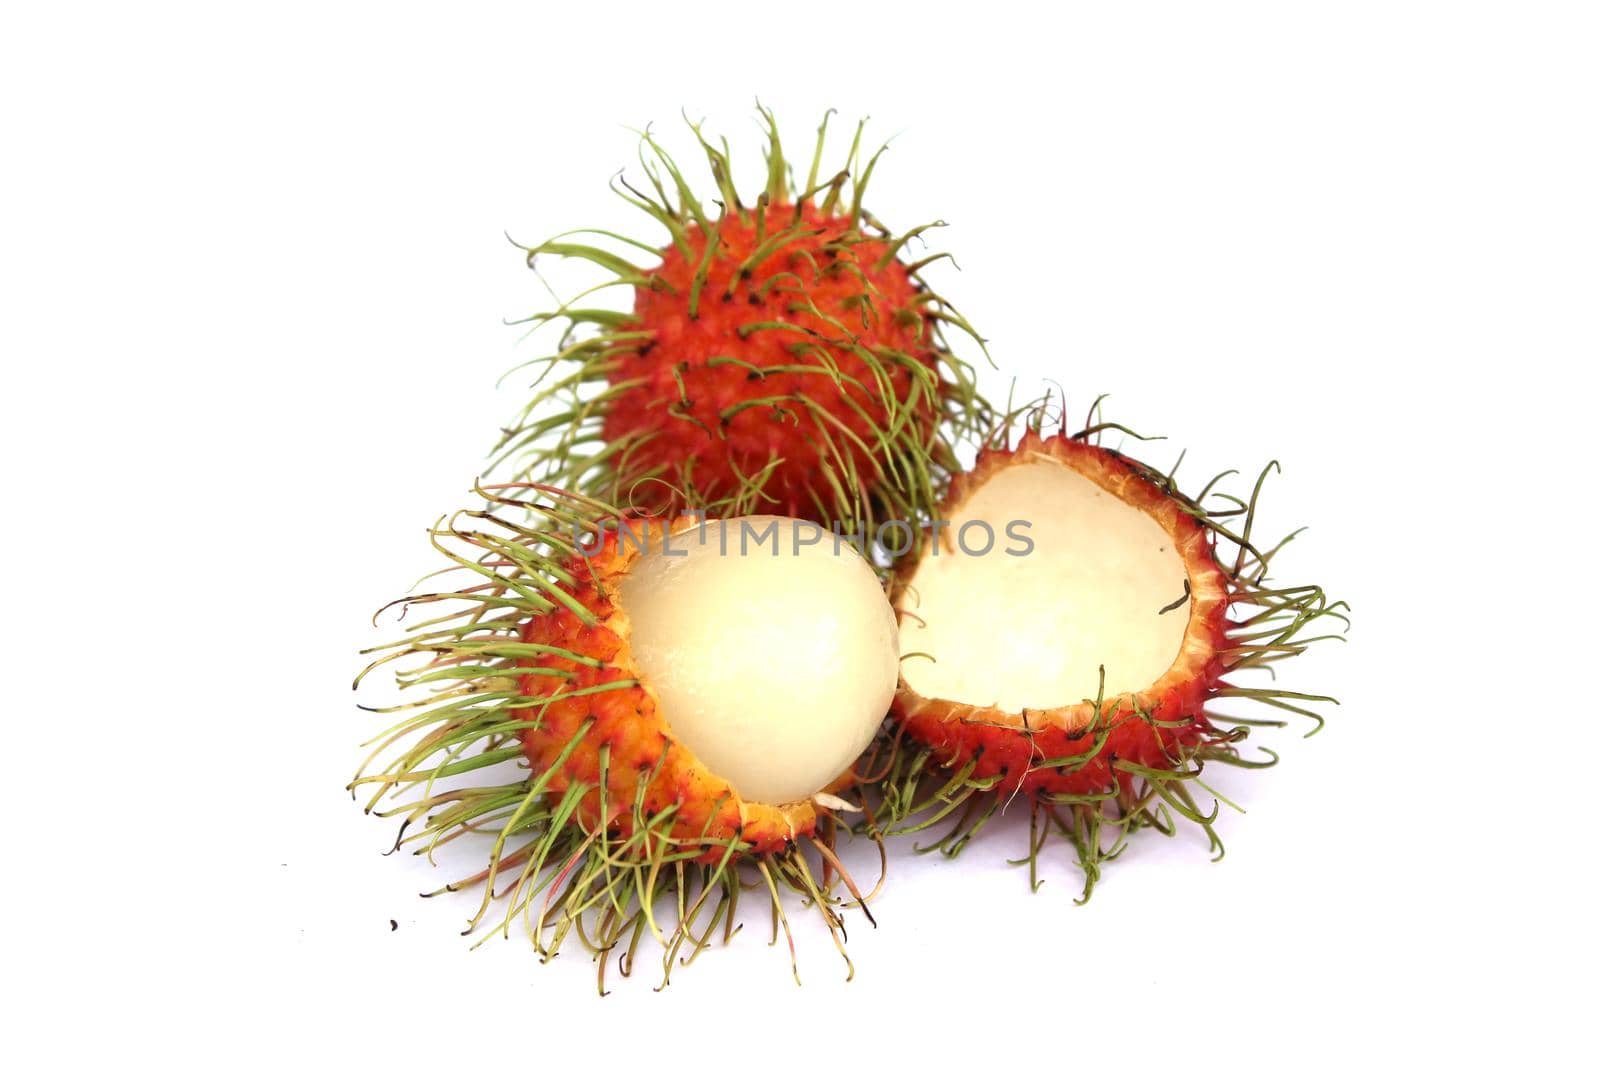 Sweet rambutan, the popular fruit of Thailand Peel off the bark to reveal the inside. isolated from a white background by pichai25